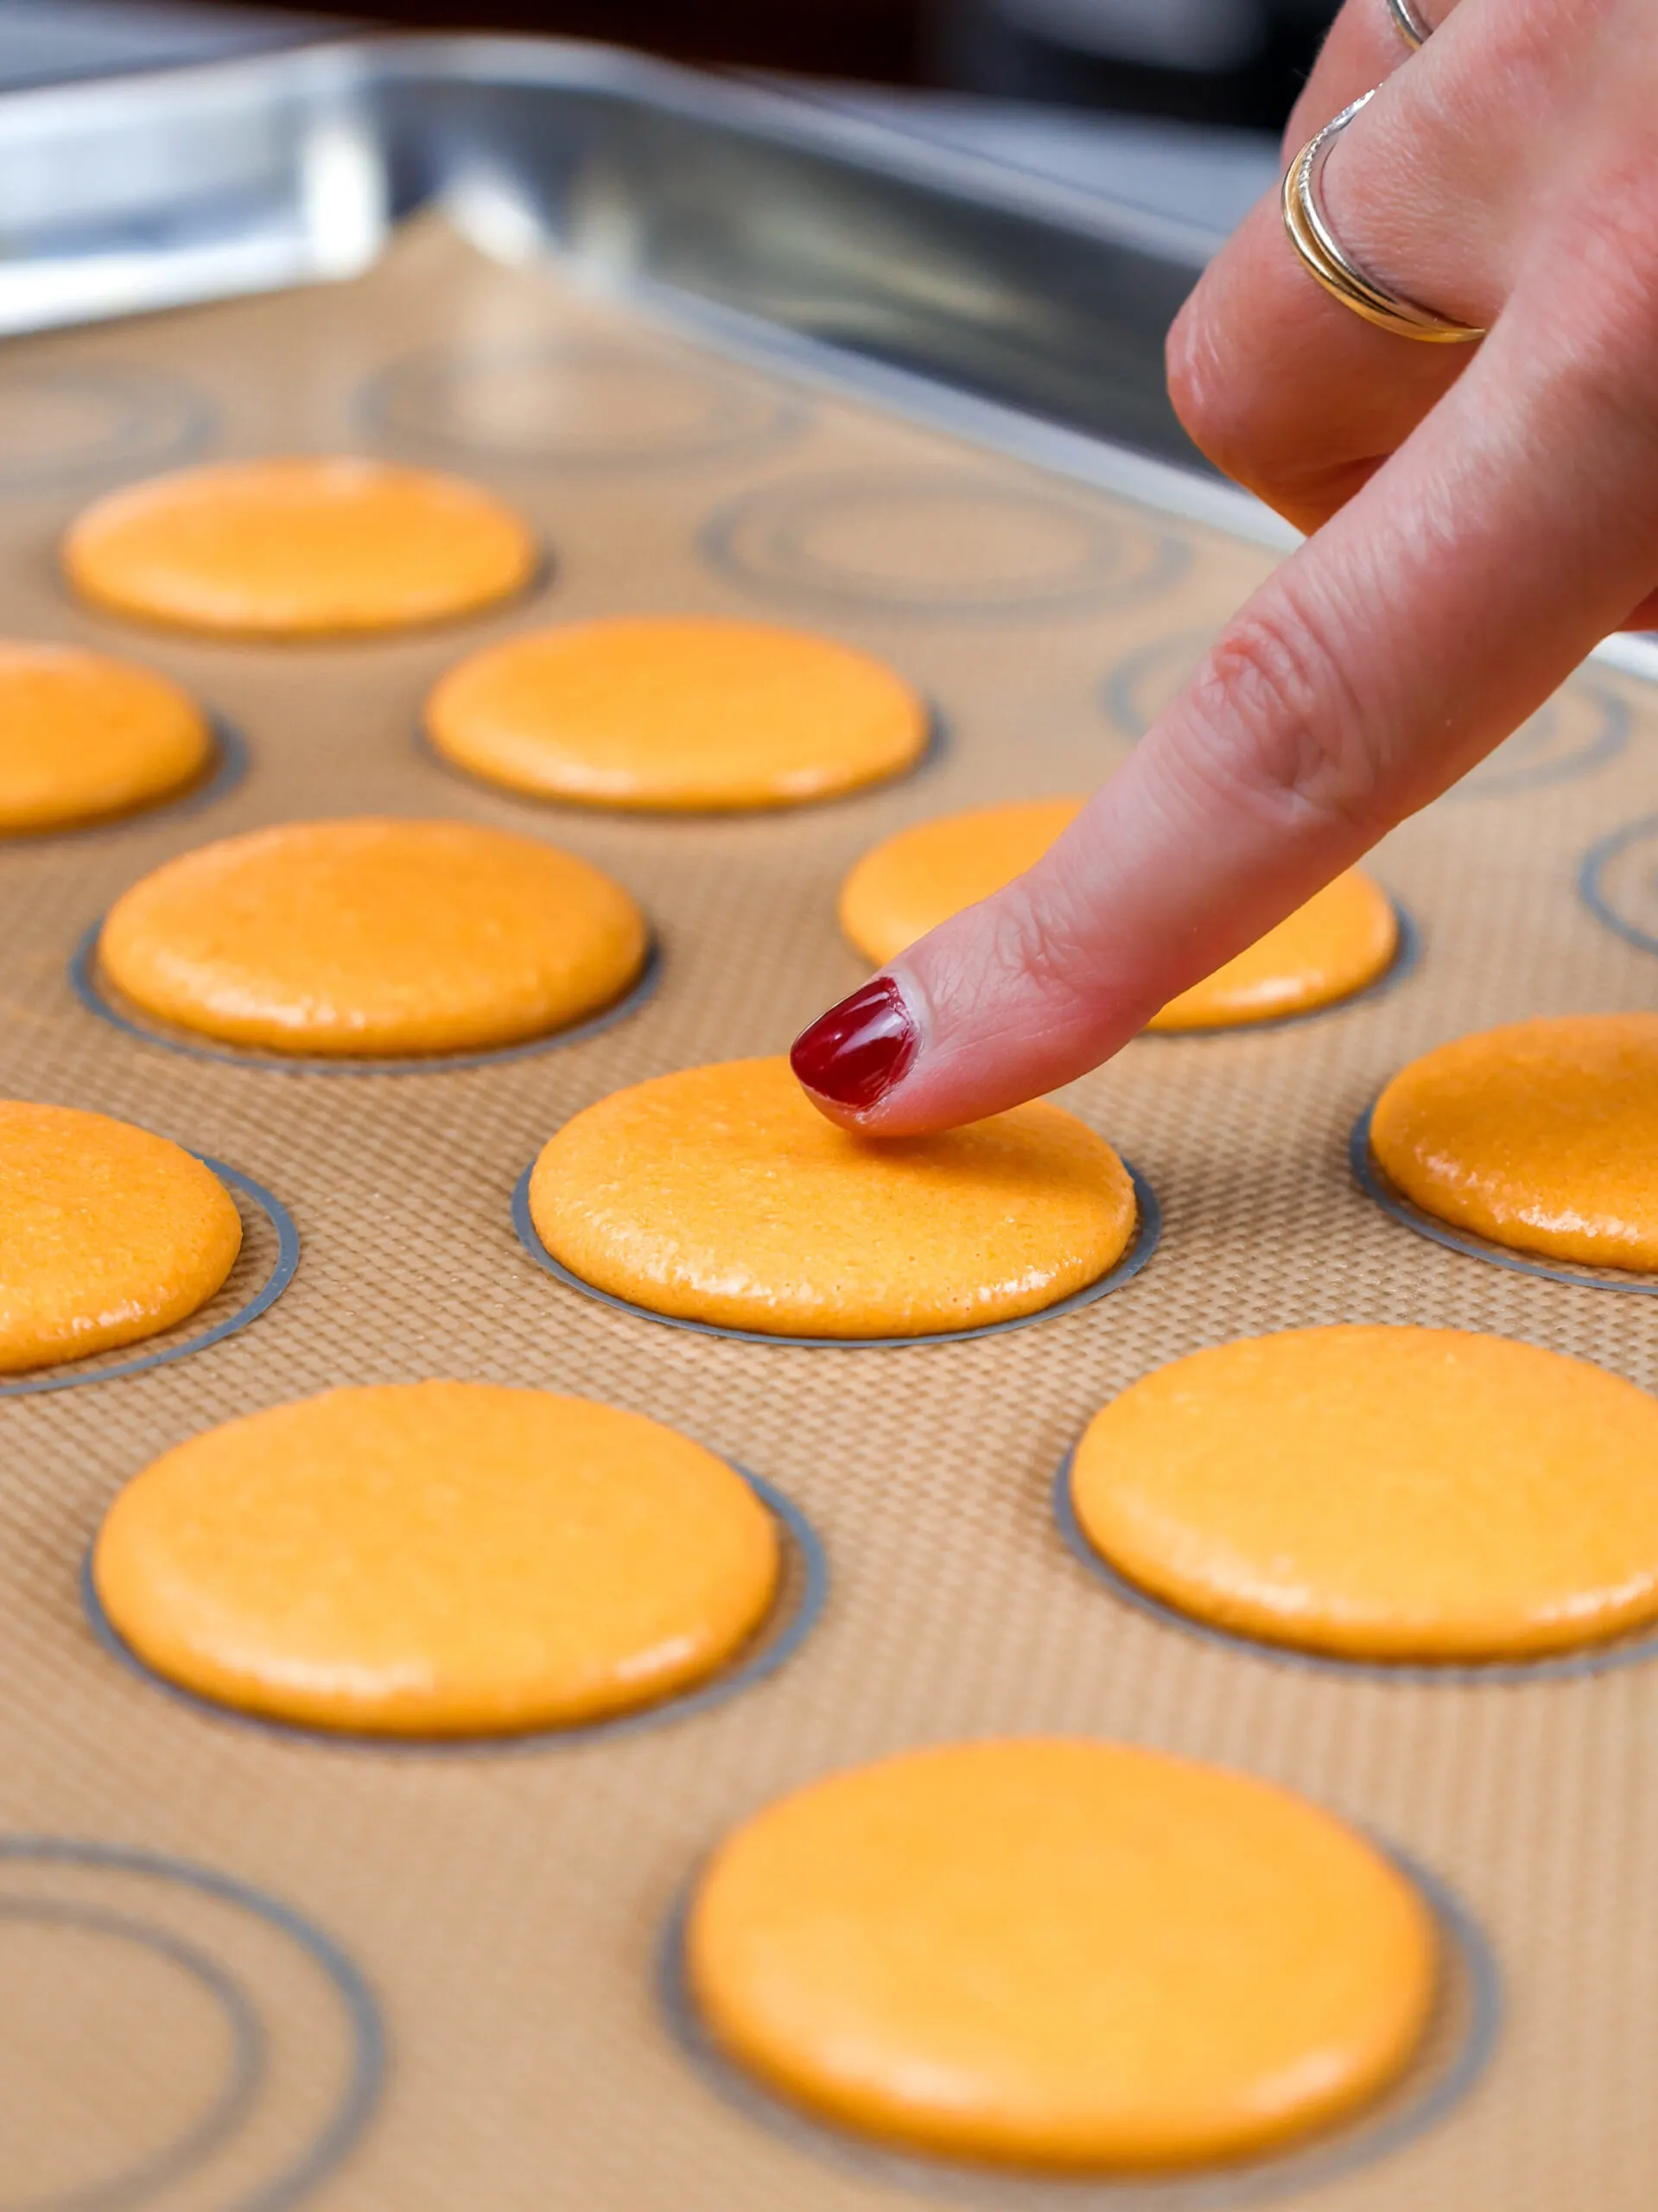 image of orange macaron shells that have rested and formed a skin before being baked